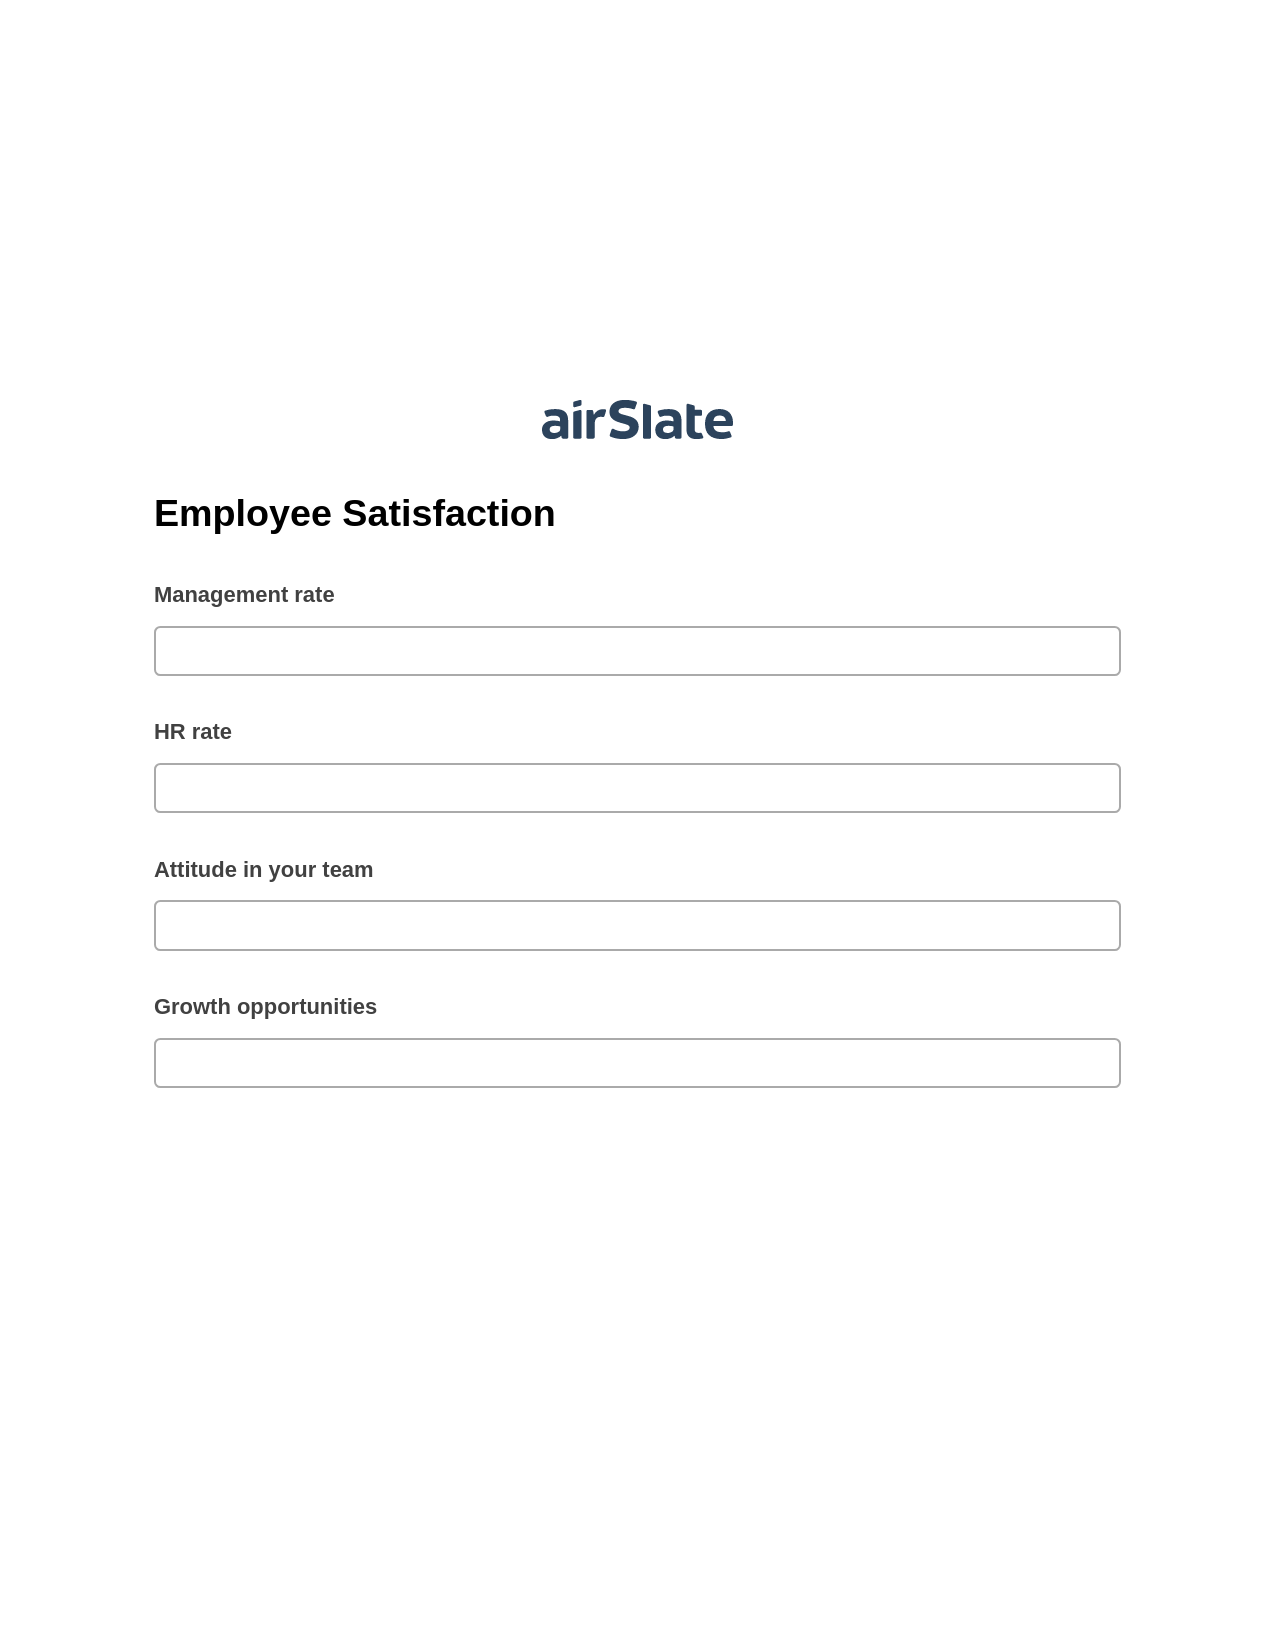 Employee Satisfaction Pre-fill from Excel Spreadsheet Bot, Email Notification Bot, Export to Salesforce Bot